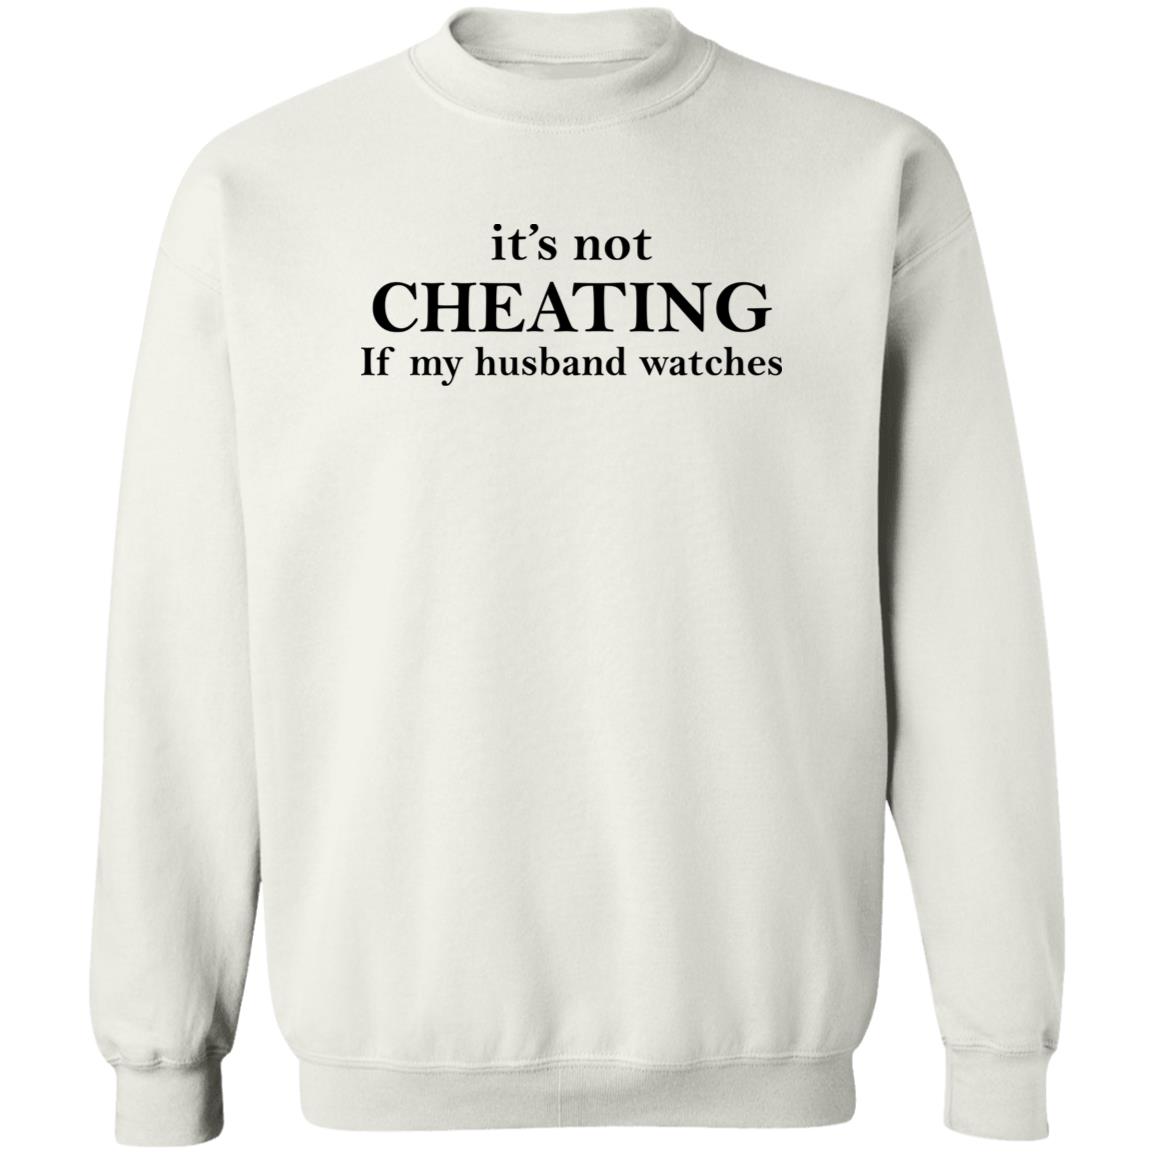 baha hamed recommends its not cheating if my boyfriend watches pic